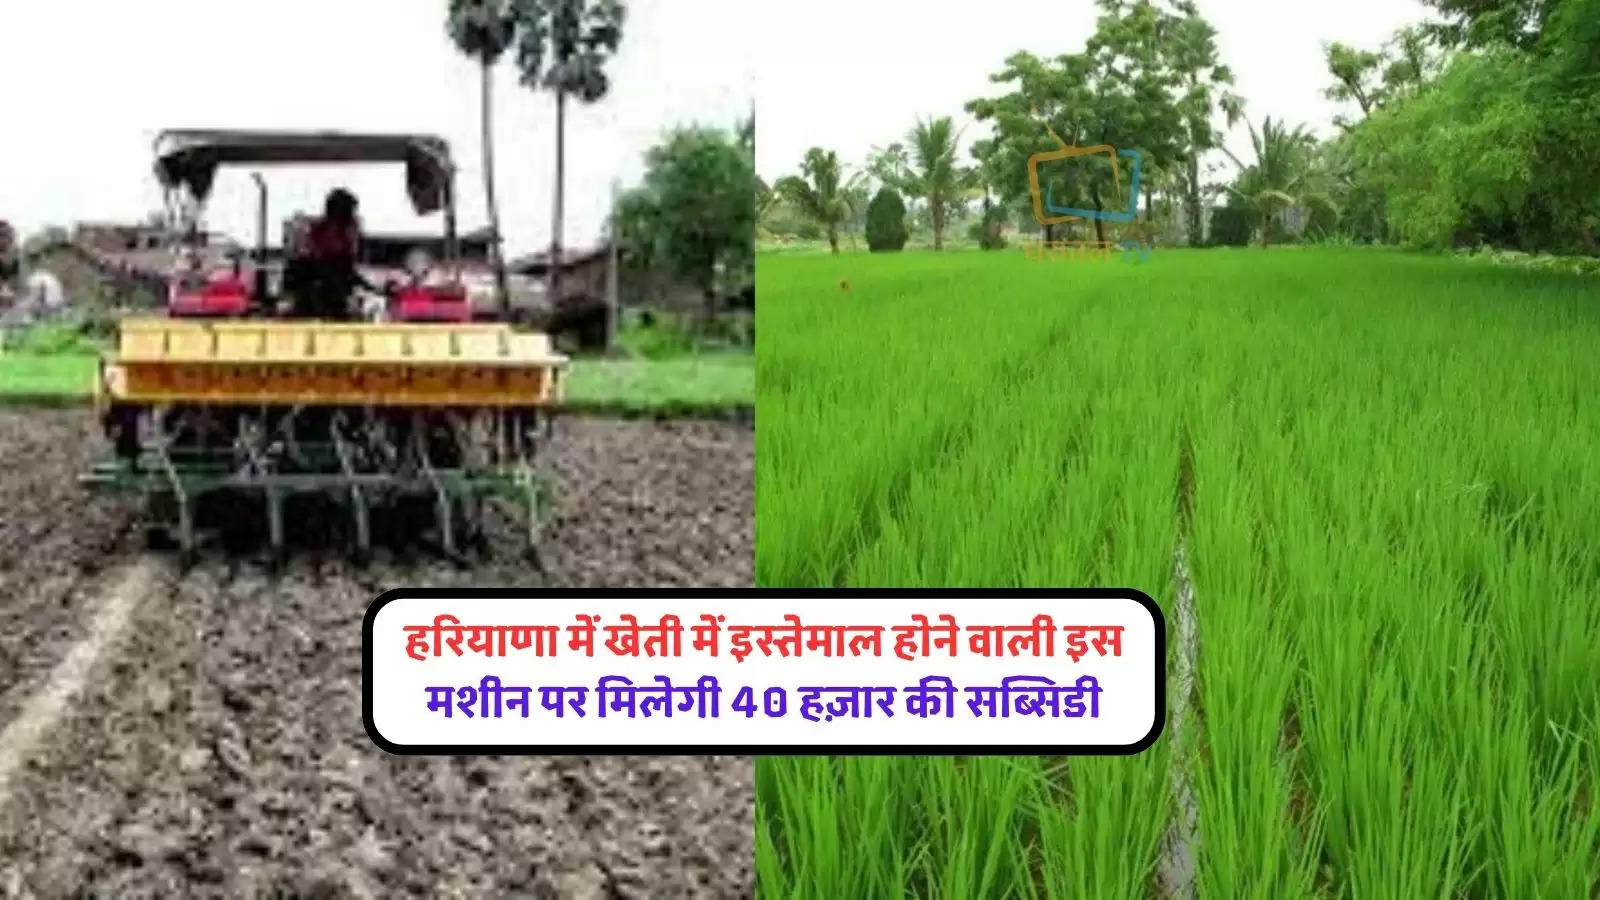 haryana-farmers-are-getting-40-thousand-rupees-subsidy-on-direct-sowing-machinery-of-paddy-state-govt-scheme-lbsa